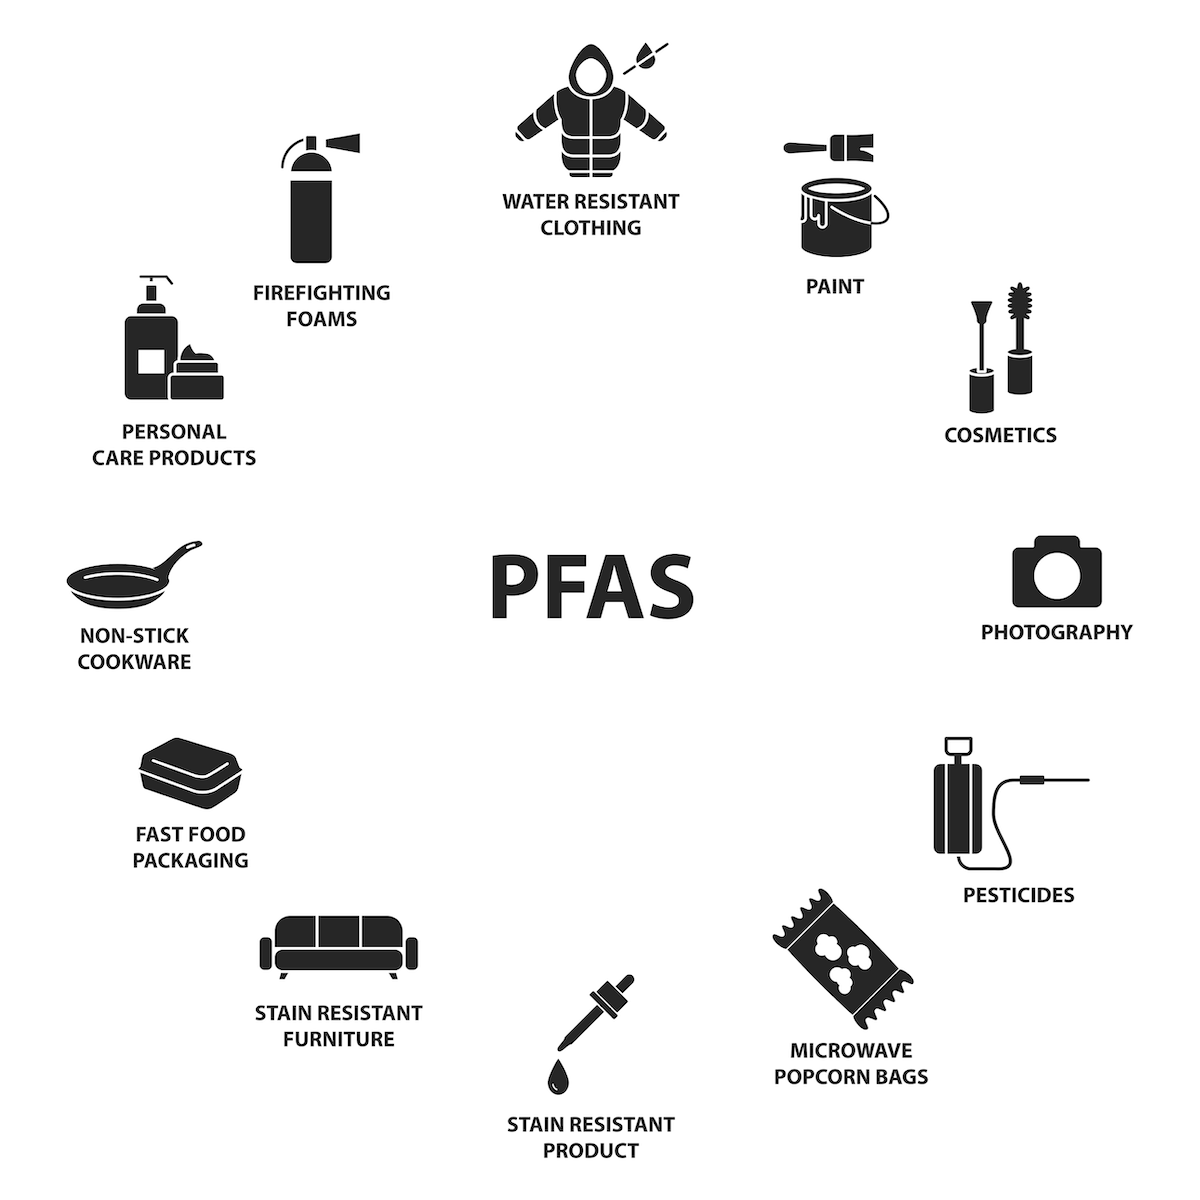 Many household items contain PFAS chemicals.